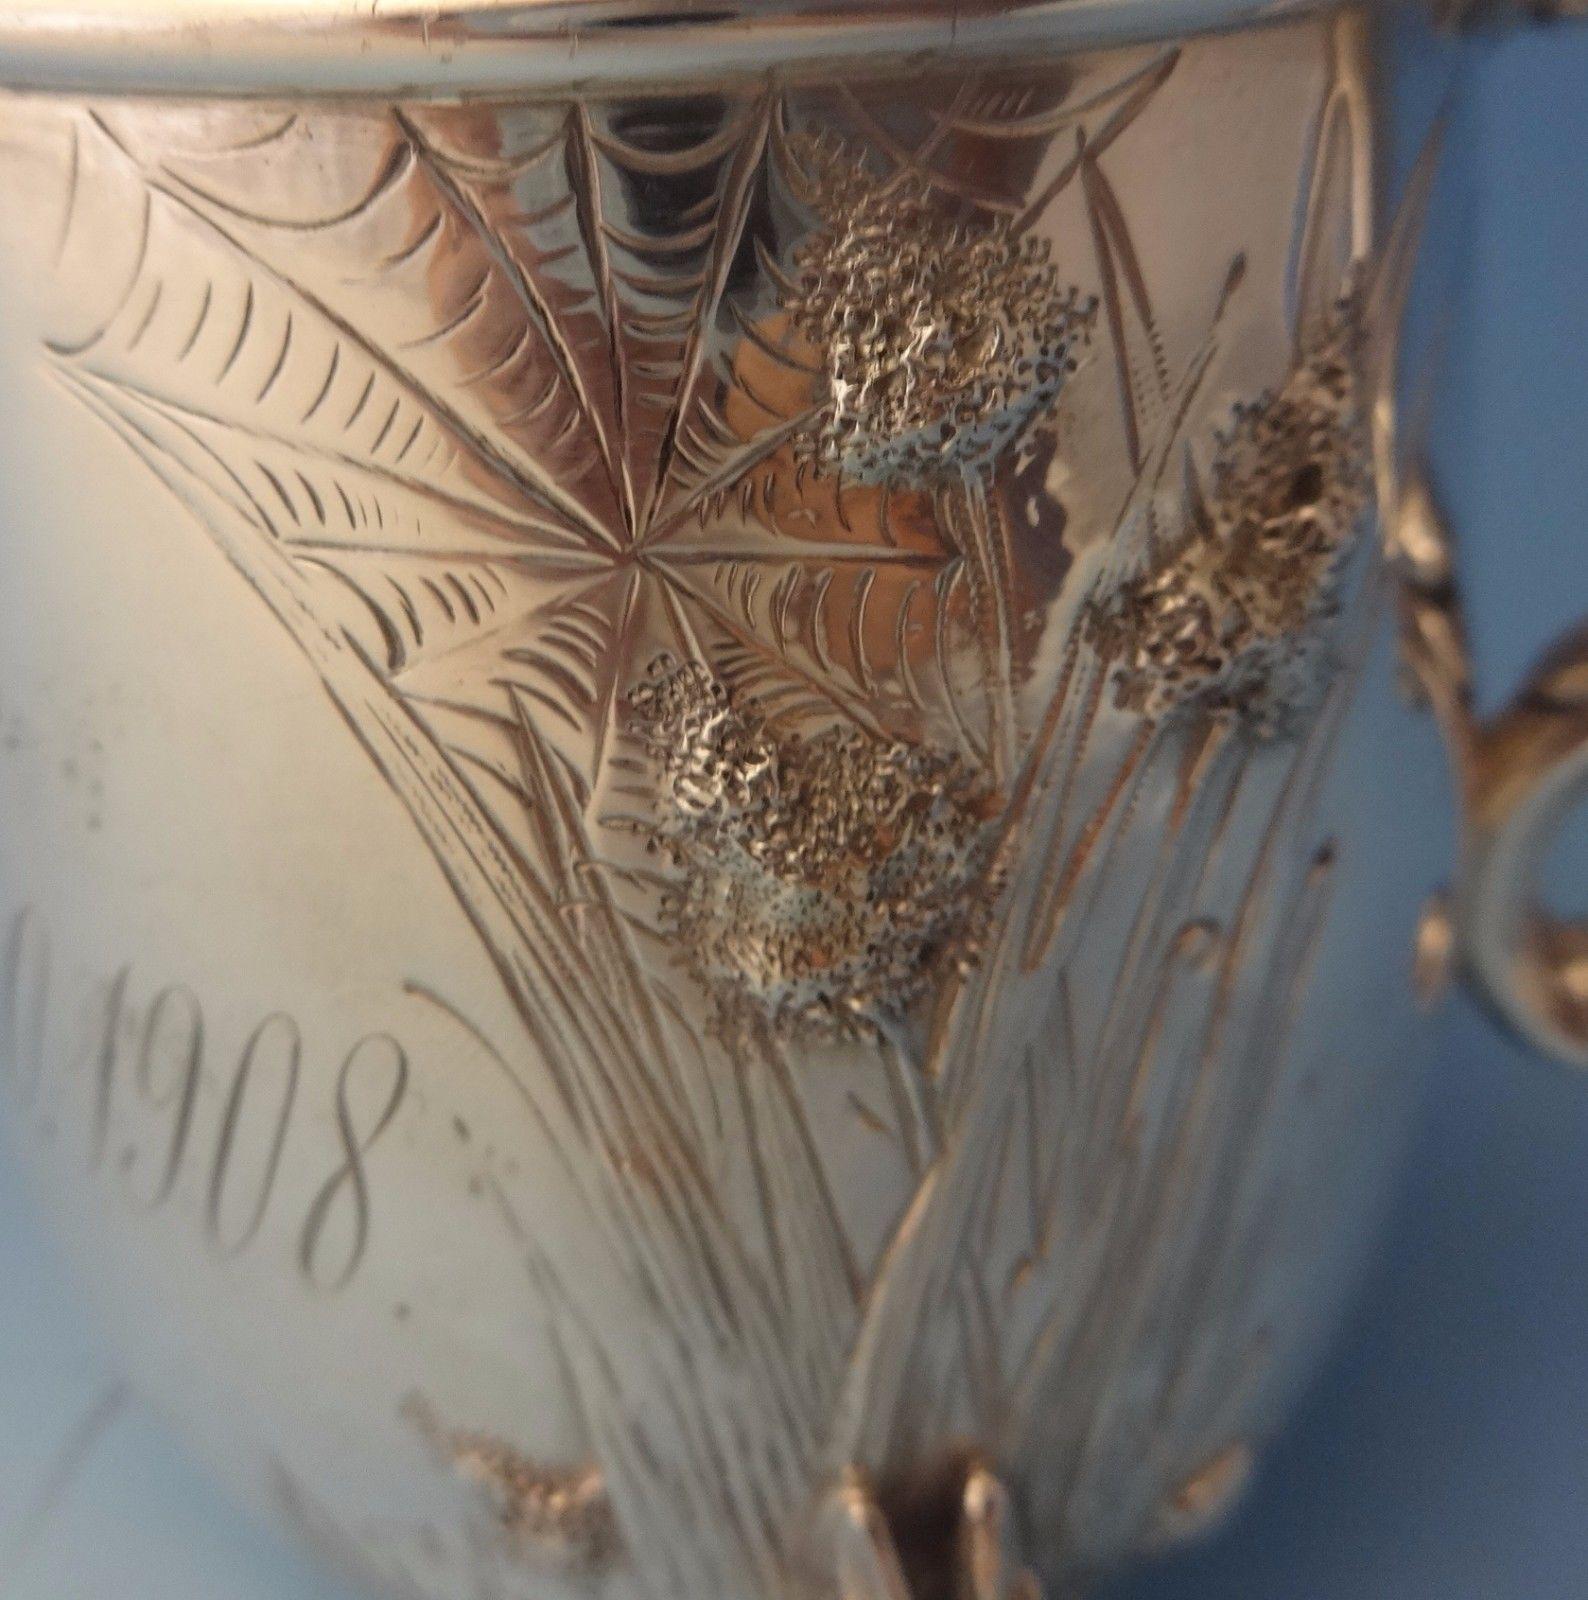 Tiffany & Co.This fine sterling baby cup was made by Tiffany & Co. featuring 3-D rabbits as the feet. It is repoussed and chased with grasses and foliage. There is also a bright cut spider web. It has a gold washed interior. The piece is monogrammed